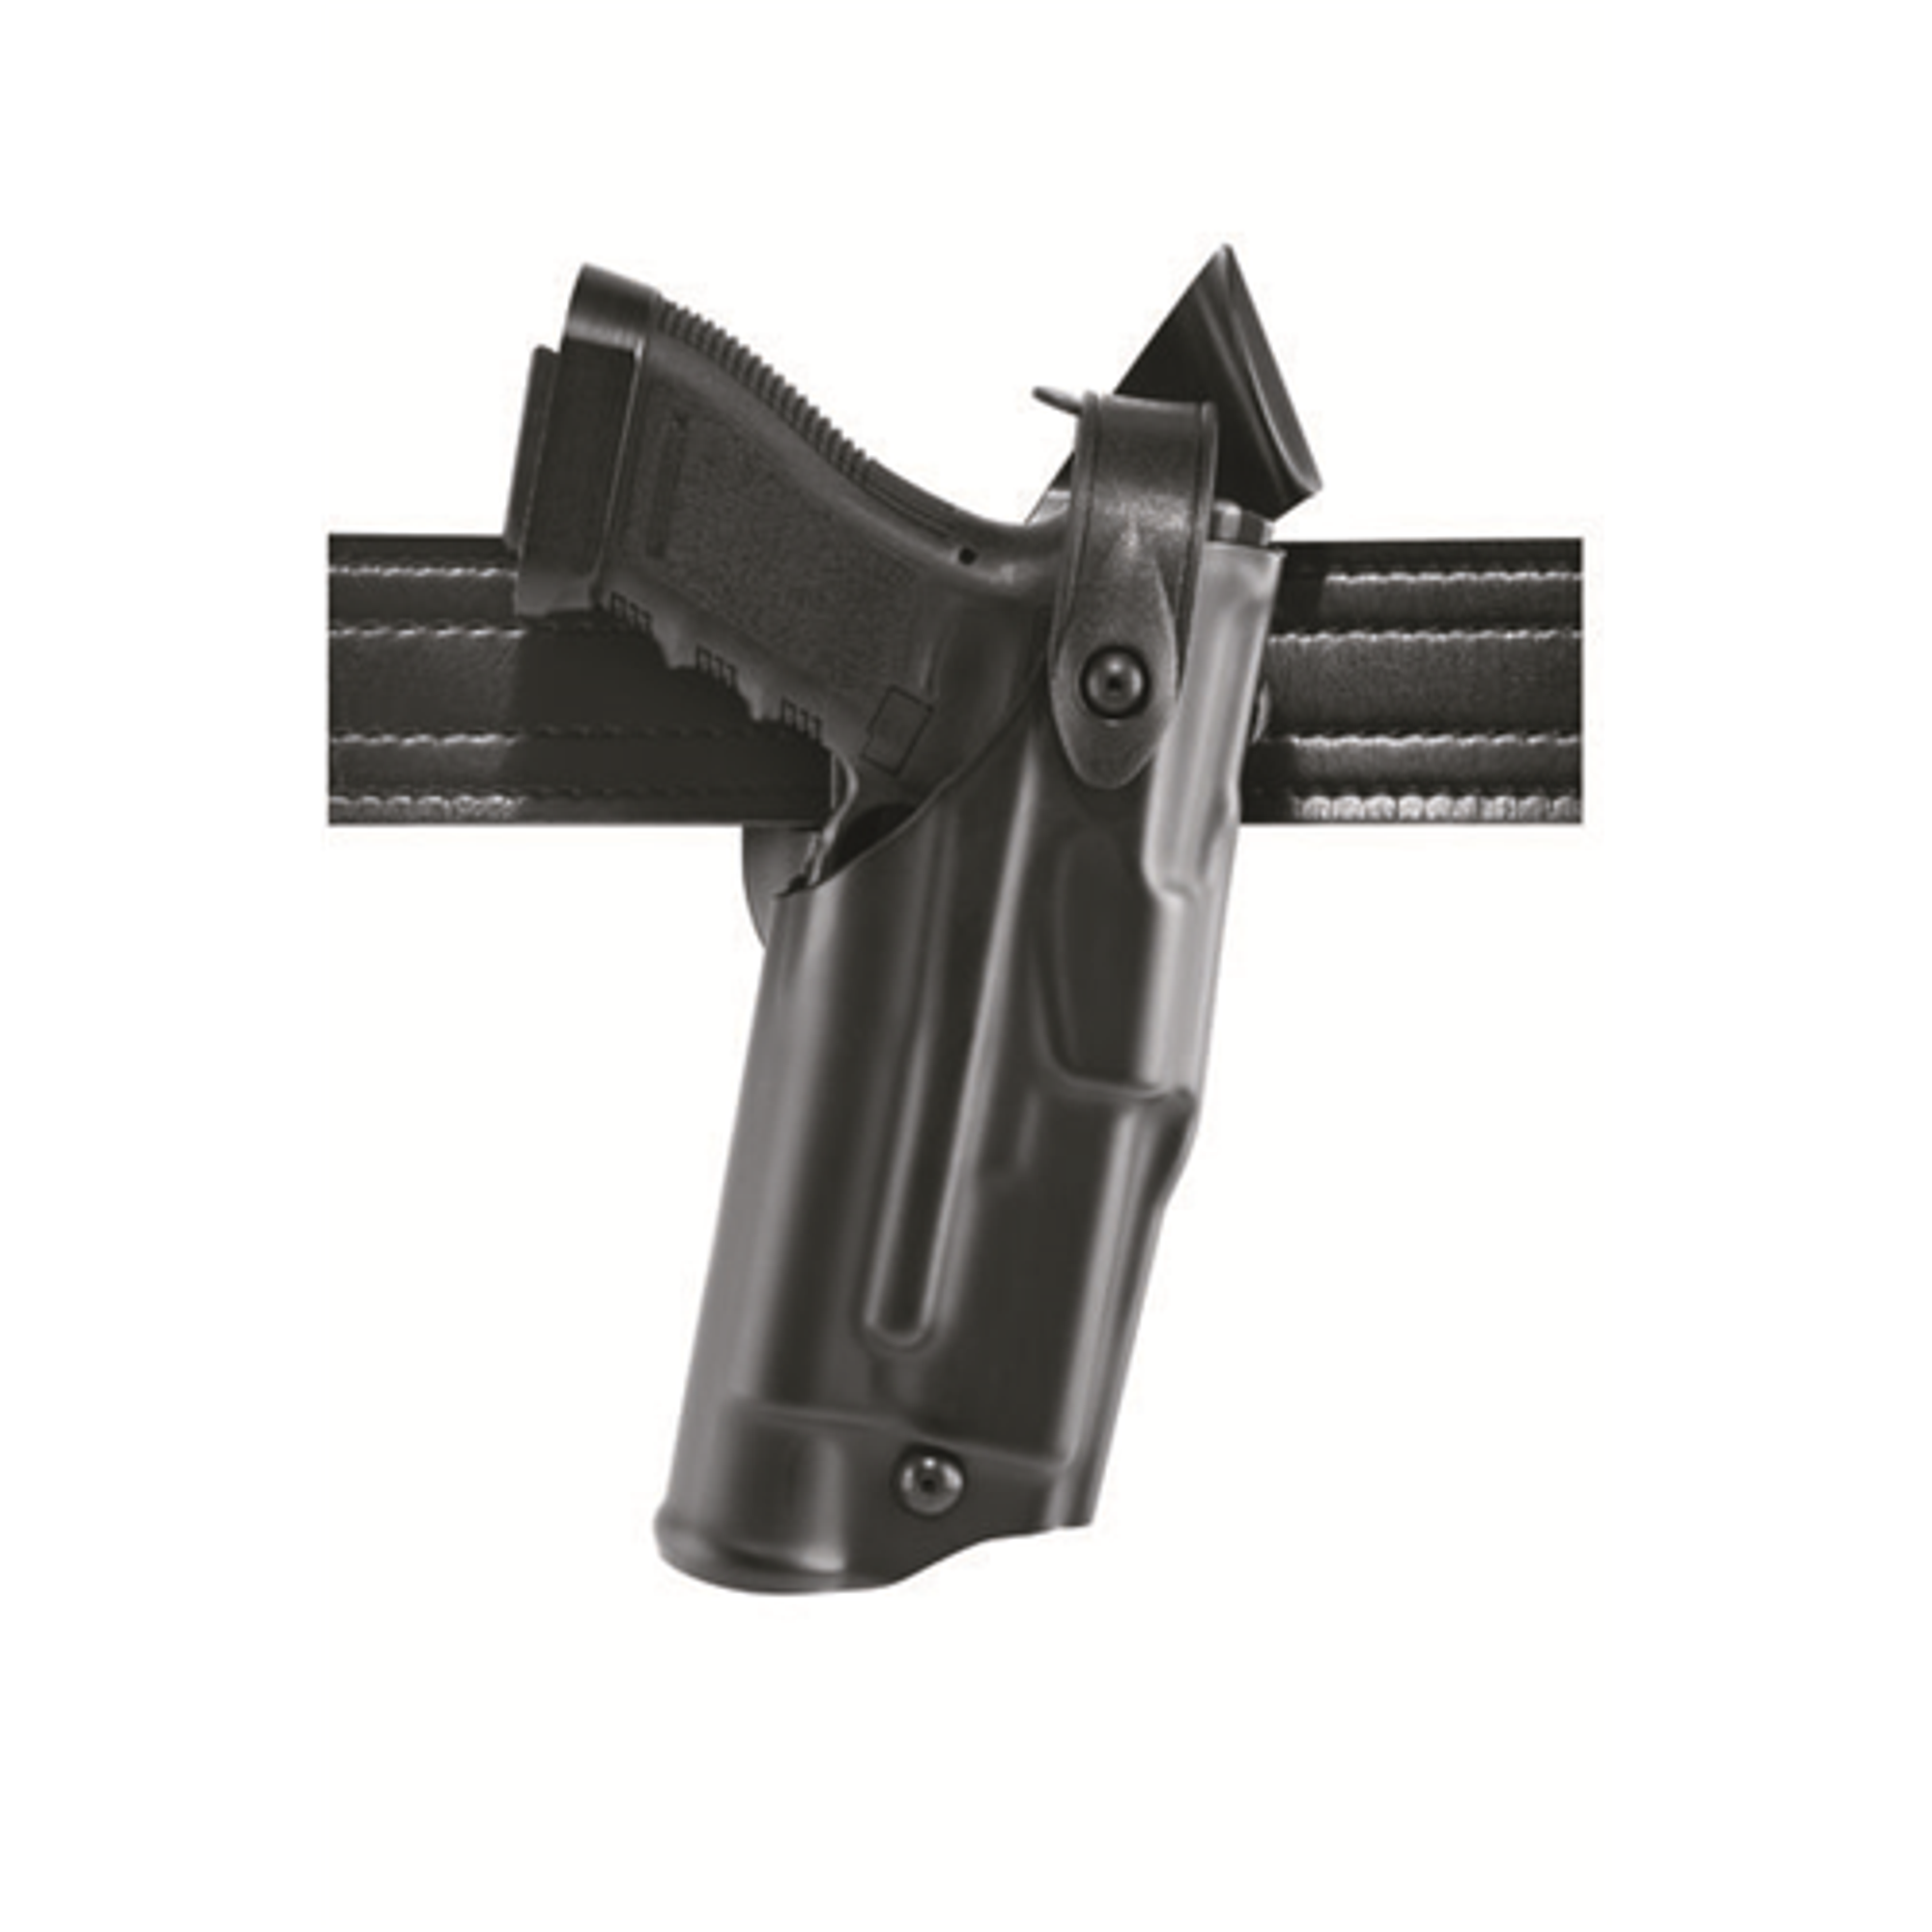 Model 6360 Als/sls Mid-ride, Level Iii Retention Duty Holster For Smith & Wesson M&p 2.0 9 W/ Light - KR6360-2222-481